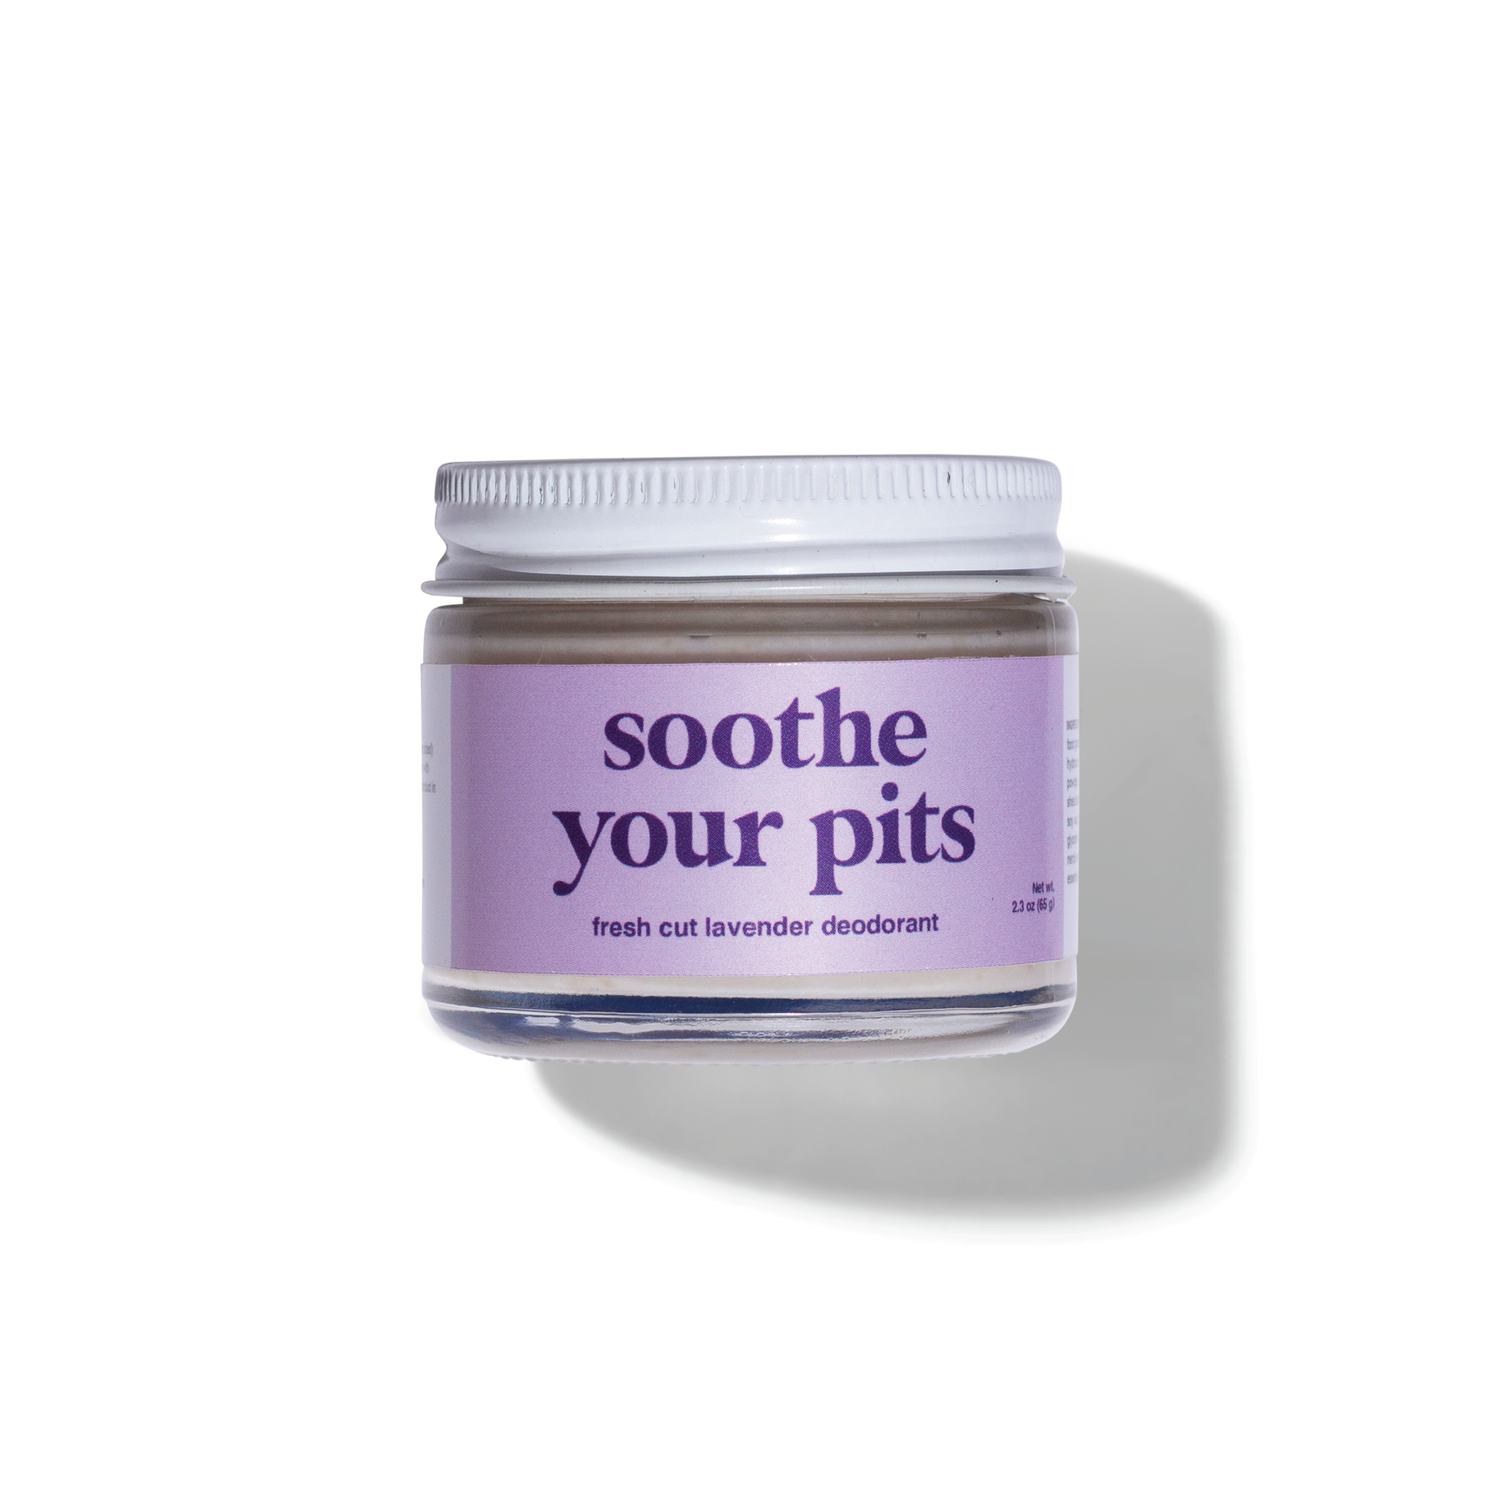 Soothe Your Pits Deodorant